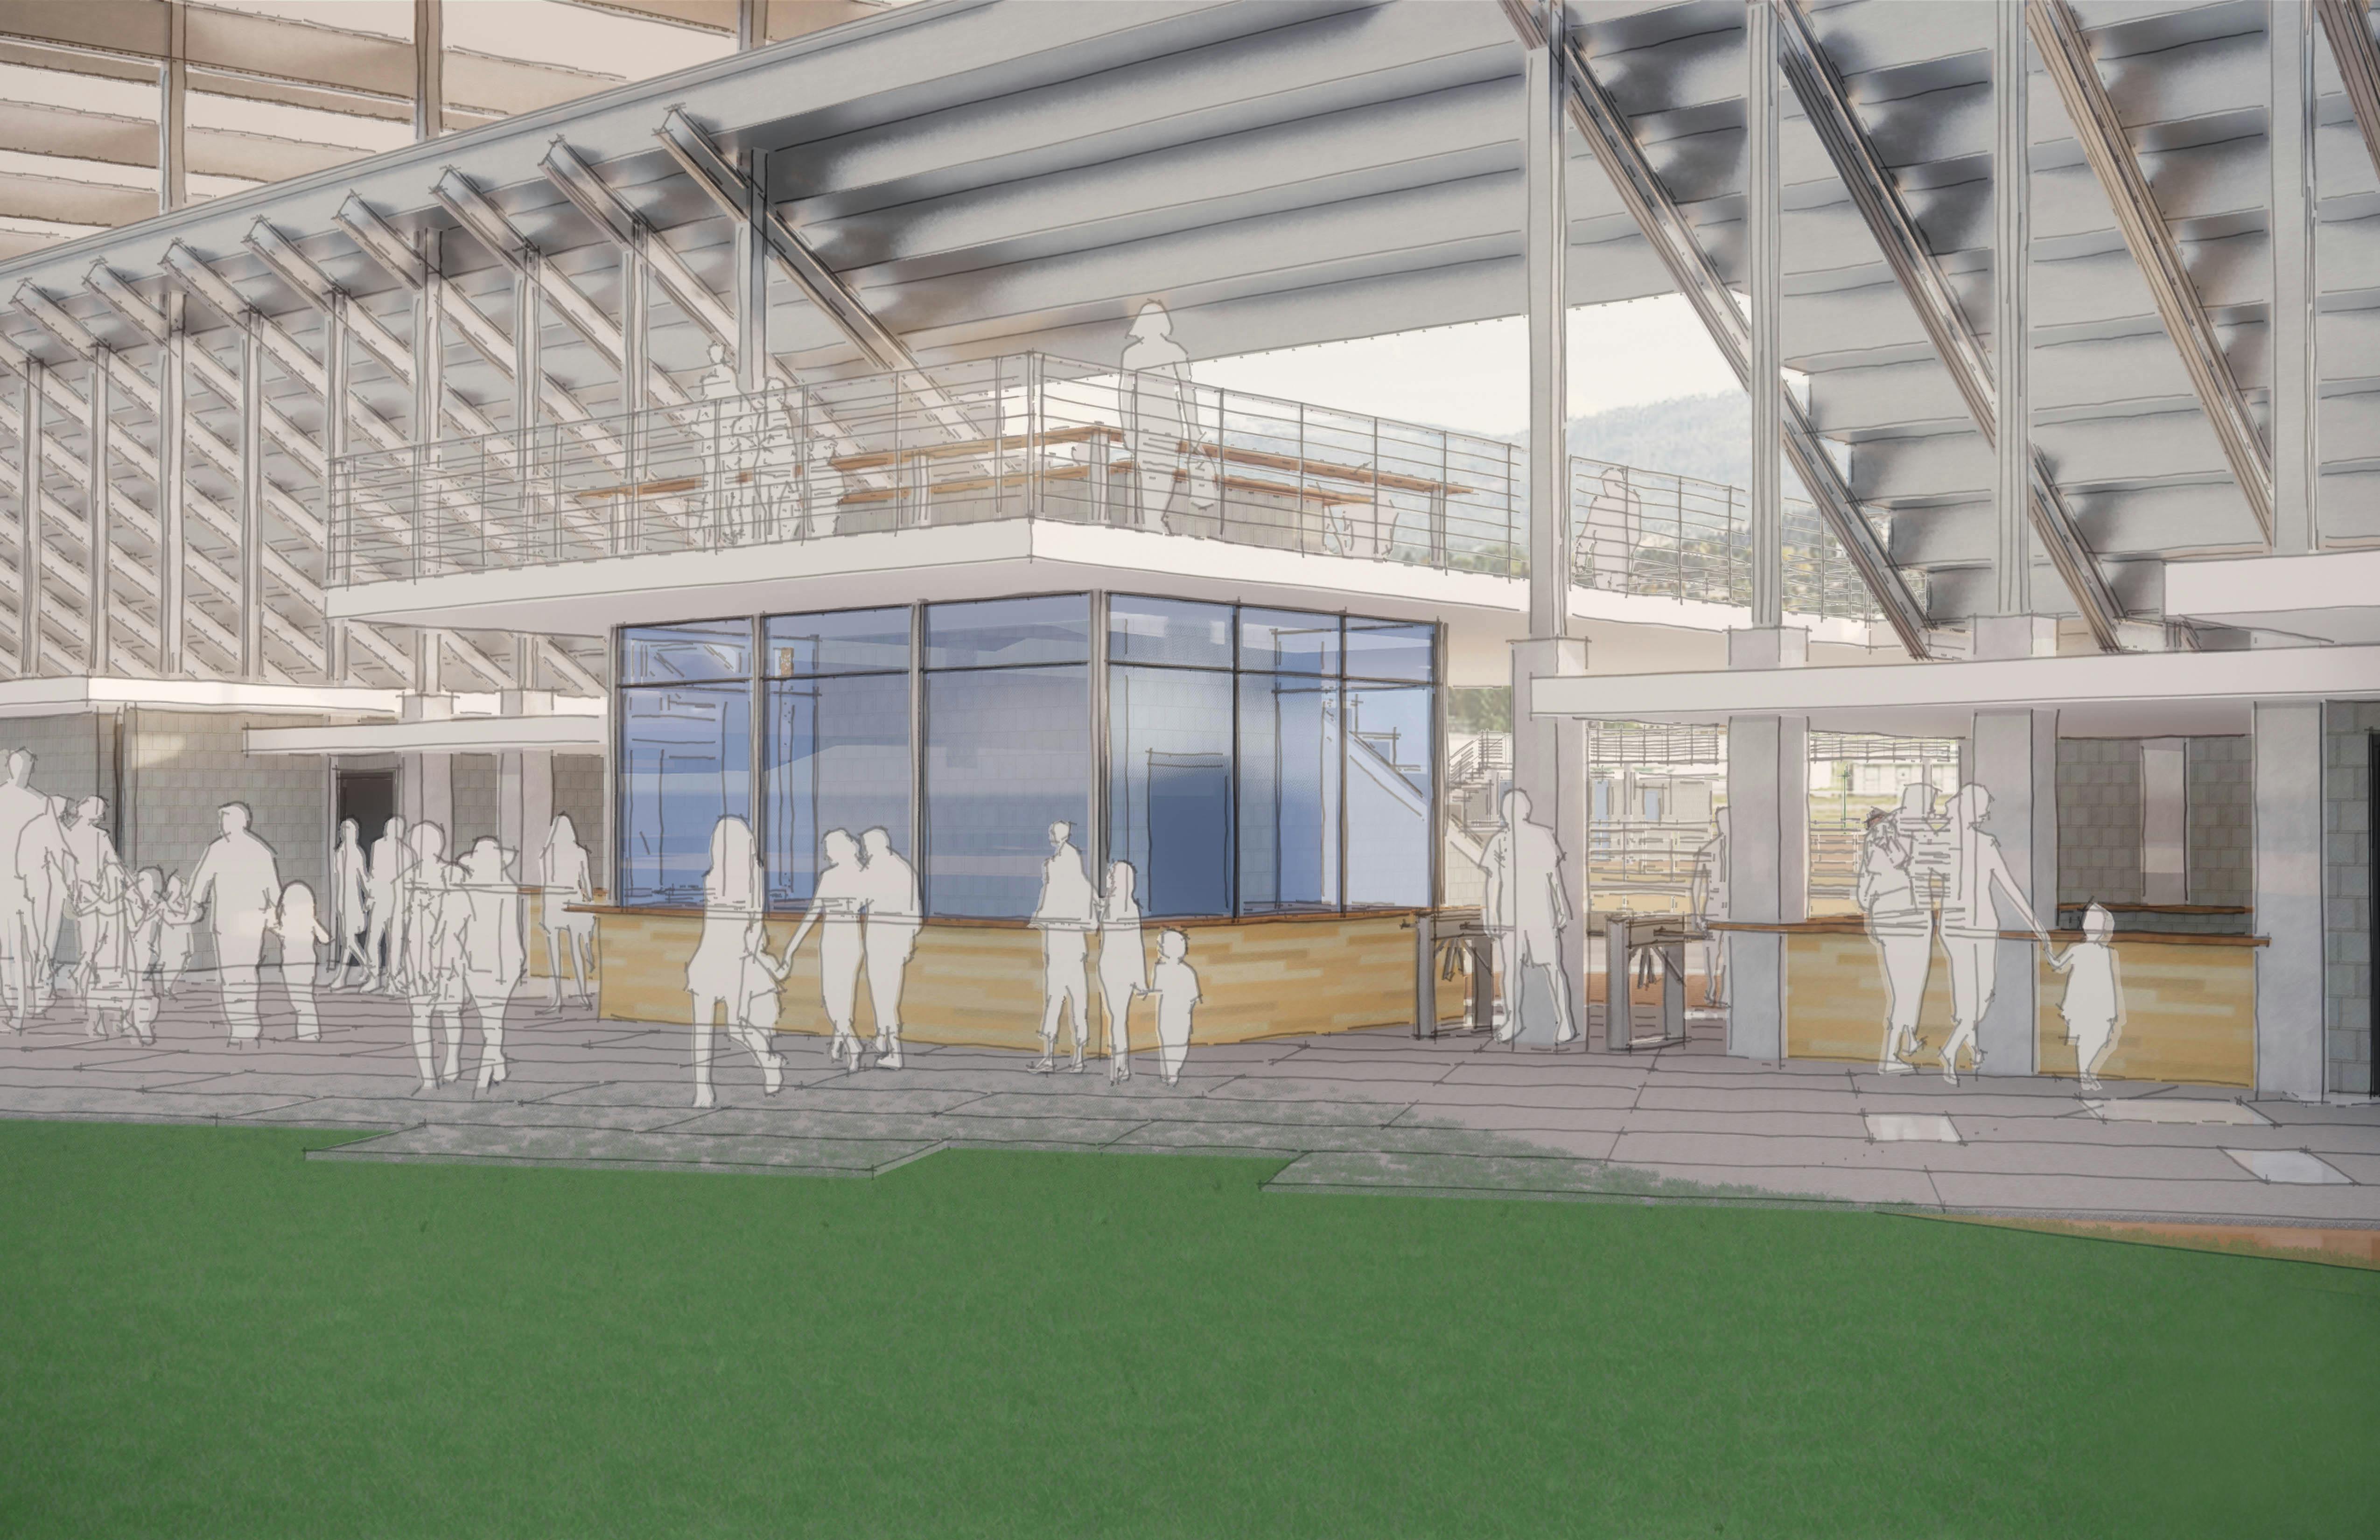 A rendering of the rodeo entry plaza behind the grandstands.